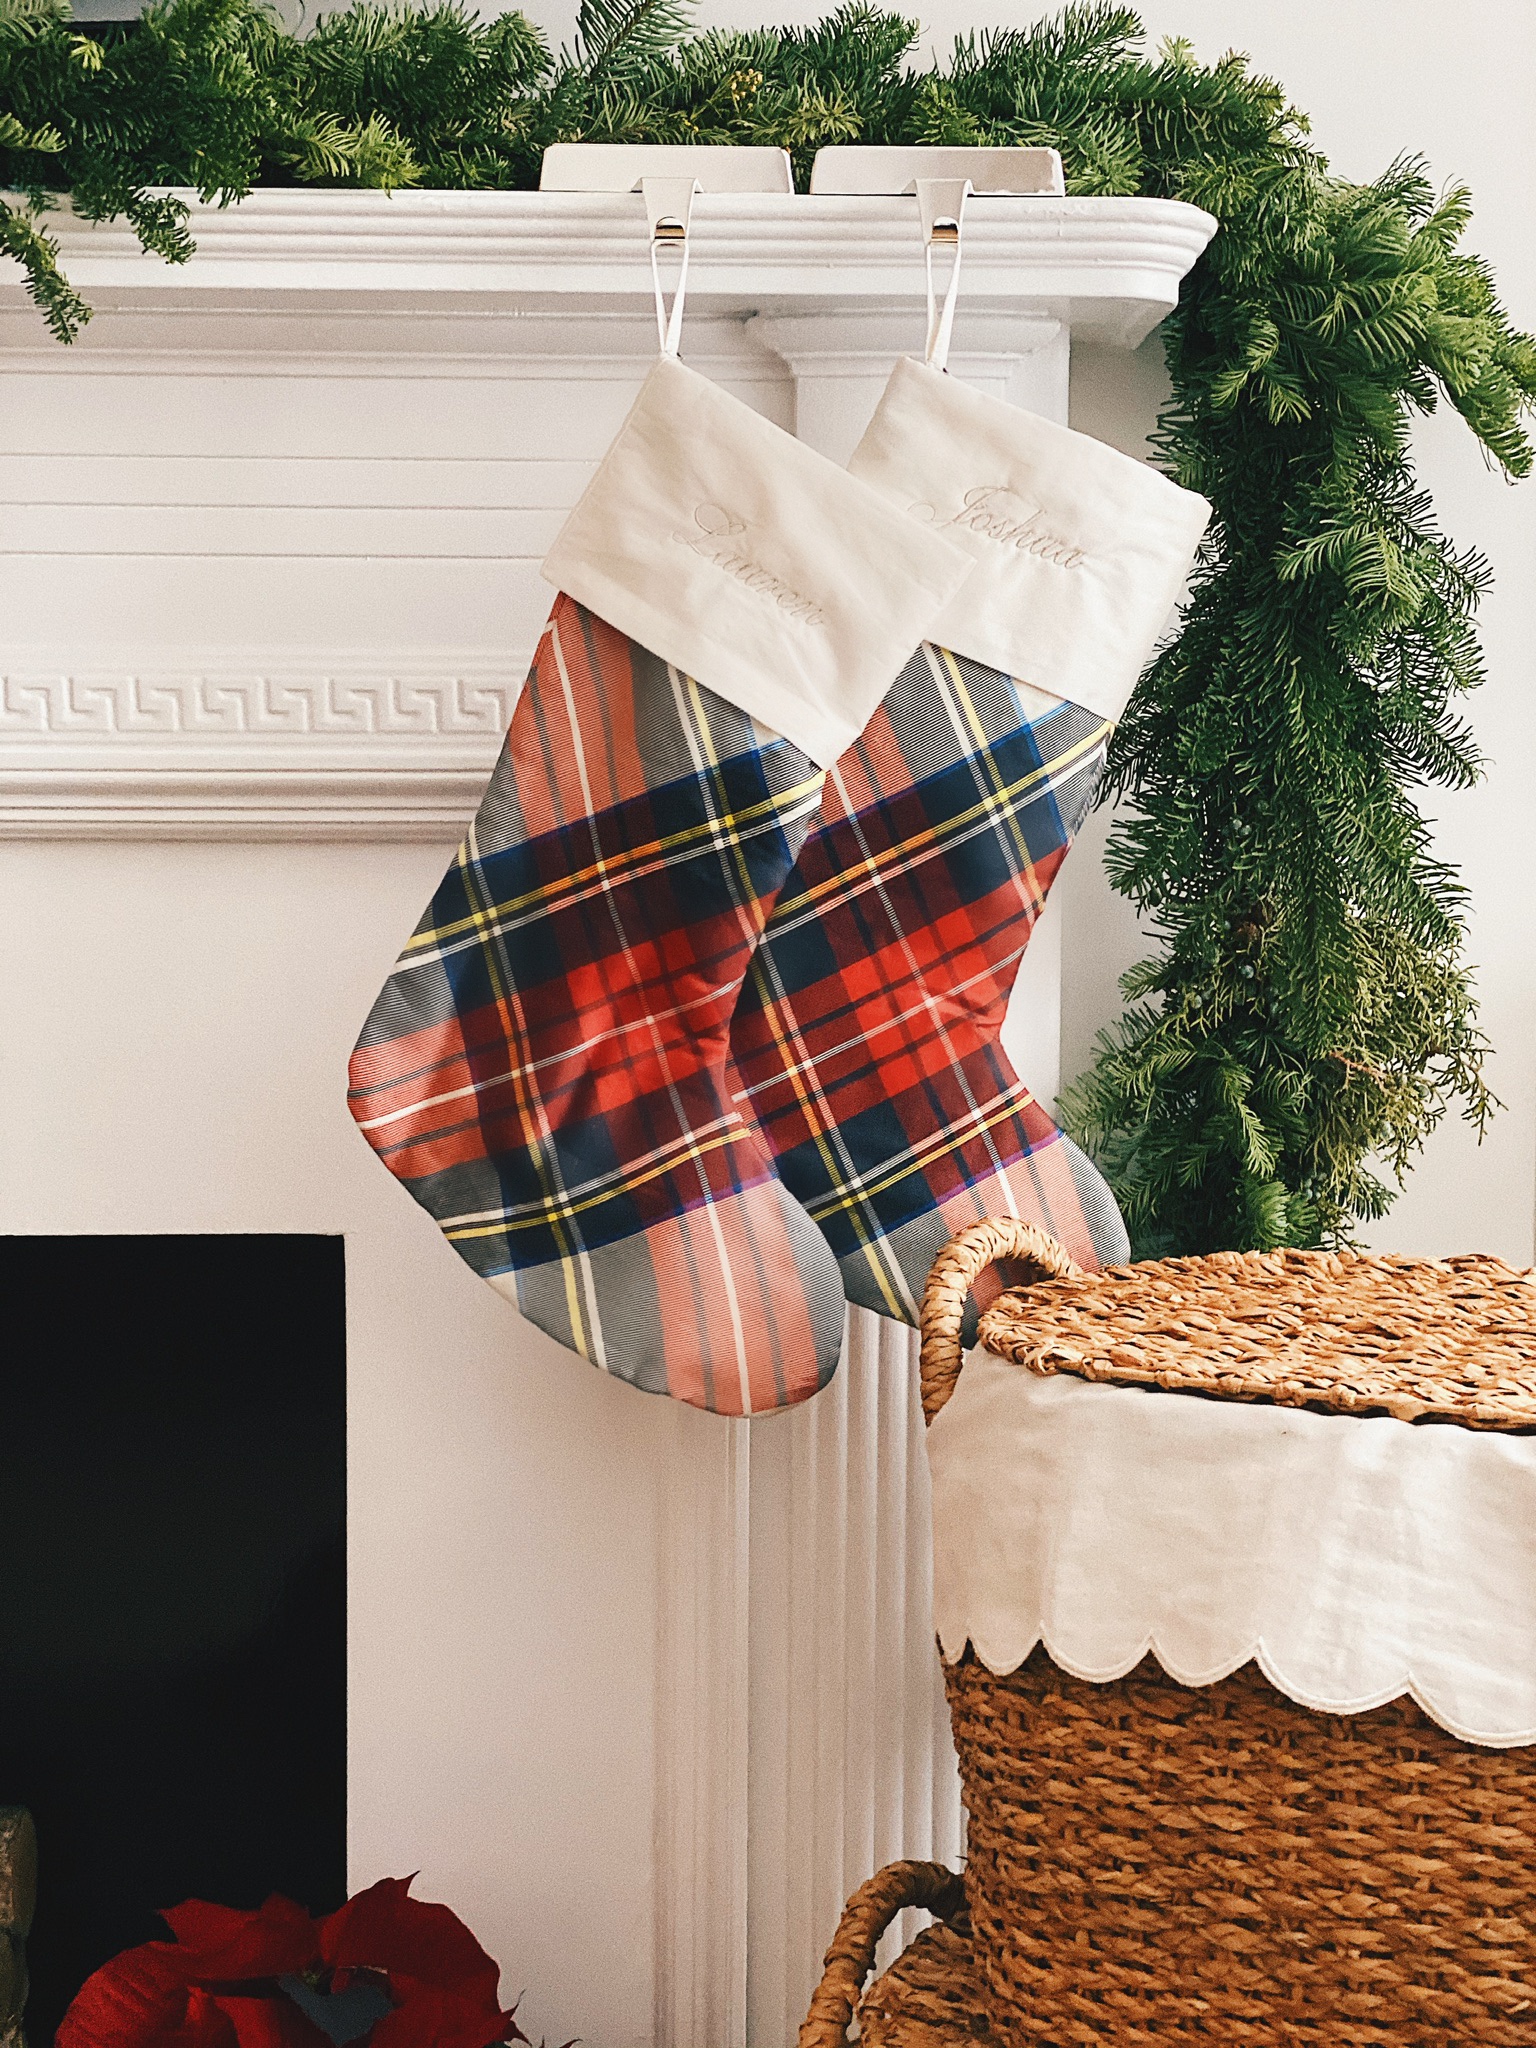 Shop The Best Tartan Plaid Gift Ideas From Pottery Barn, Williams-Sonoma and more!